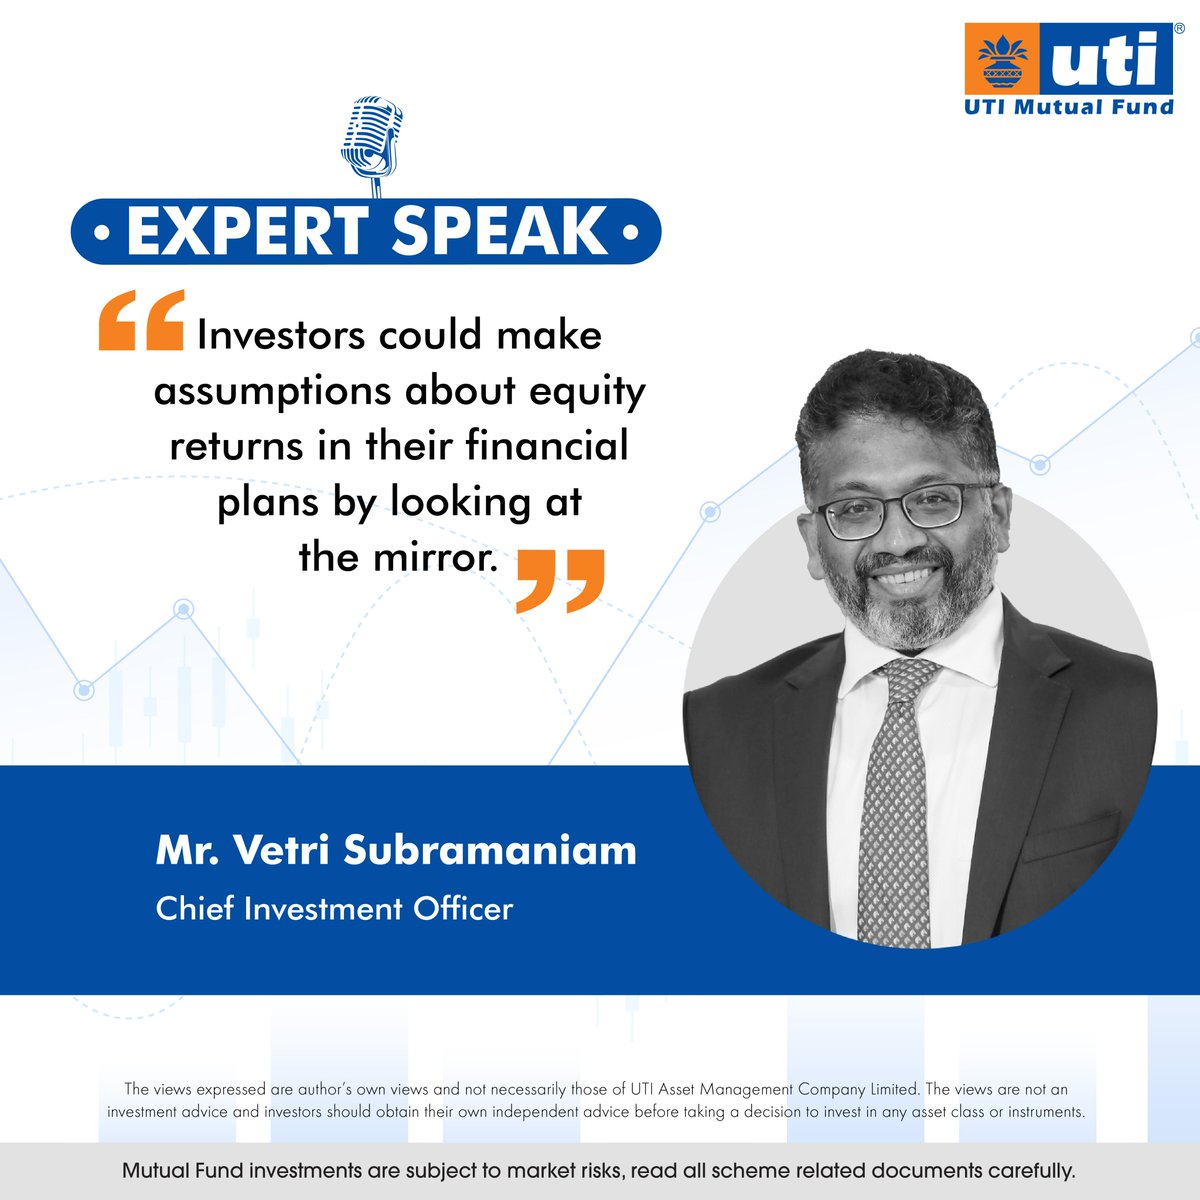 Mr. Vetri Subramaniam, Chief Investment Officer, talks about problems investors face in terms of too much data, and what assumptions they can use while making their asset allocation and managing risk.

Read more: bit.ly/3xBQoBQ

#ExpertSpeak #UTIMutualFund #MutualFunds